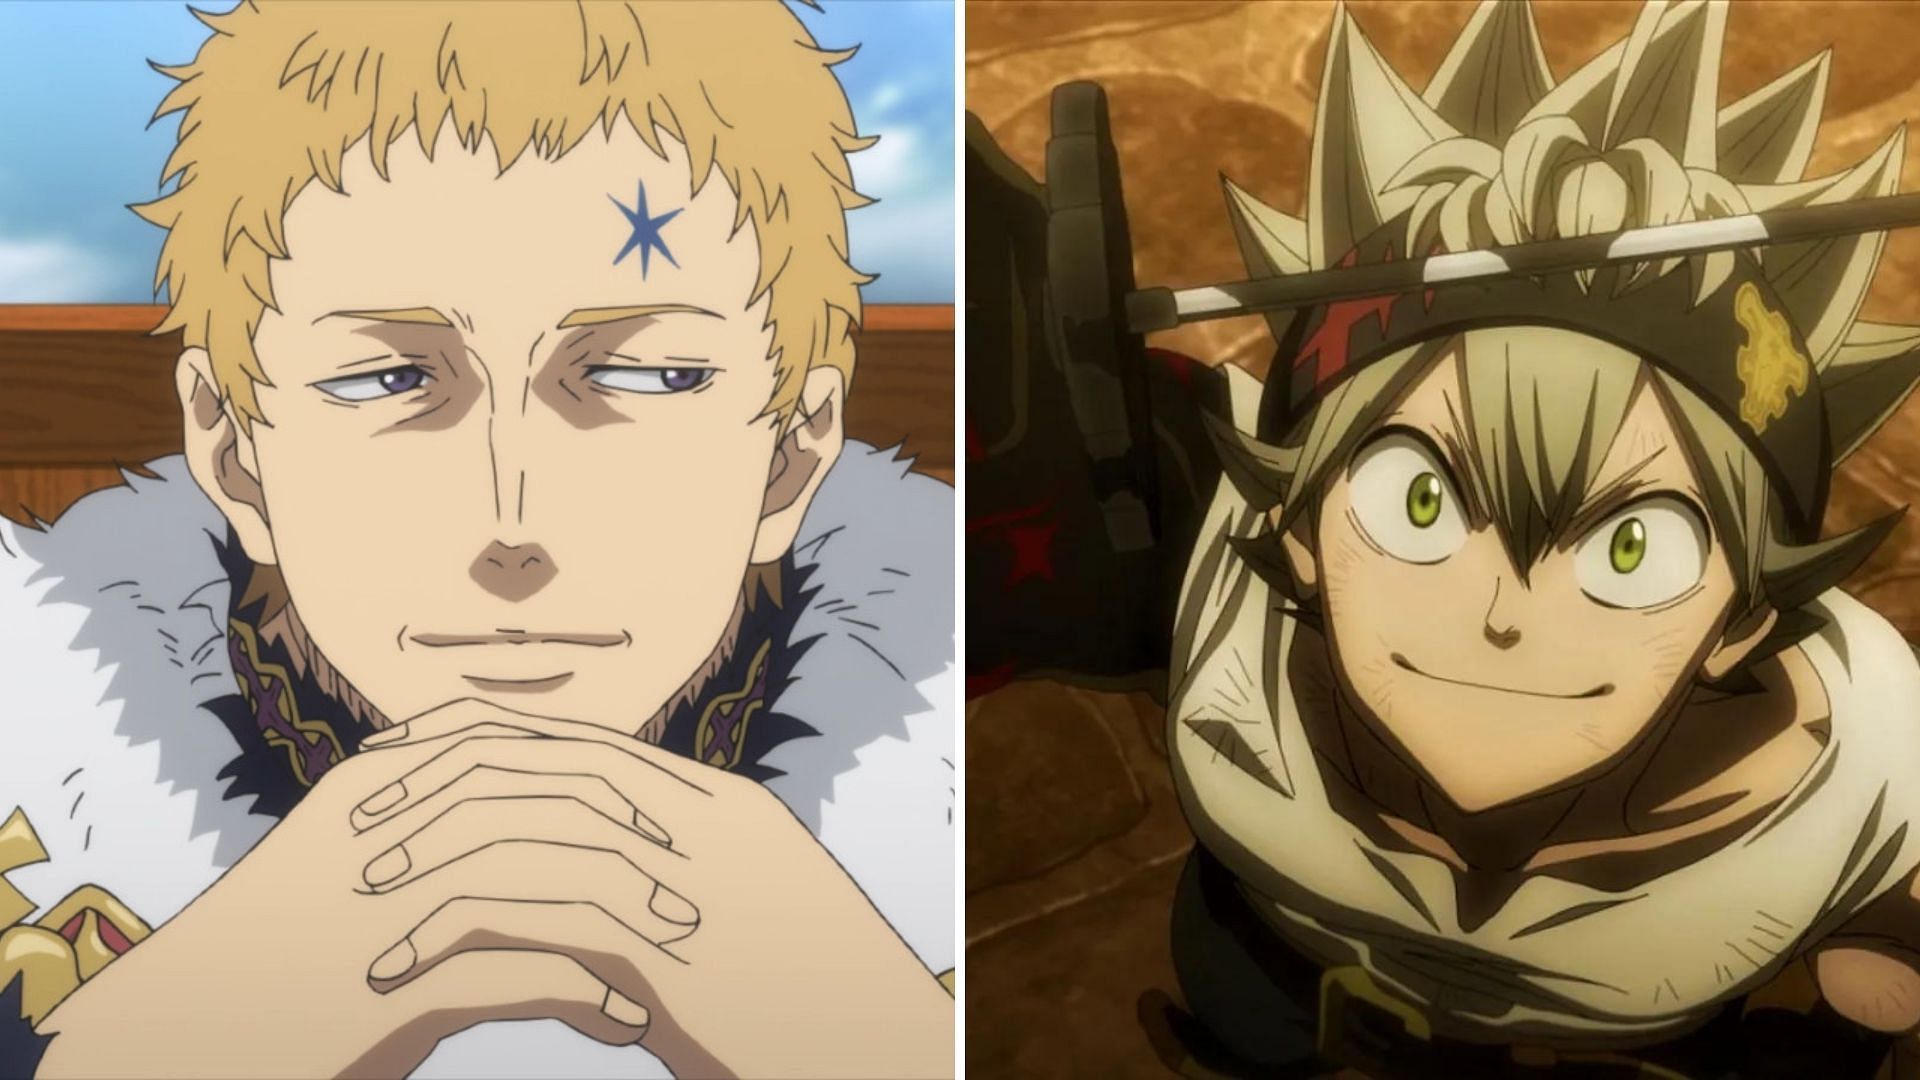 they were hinting asta black for since episode 1 : r/BlackClover